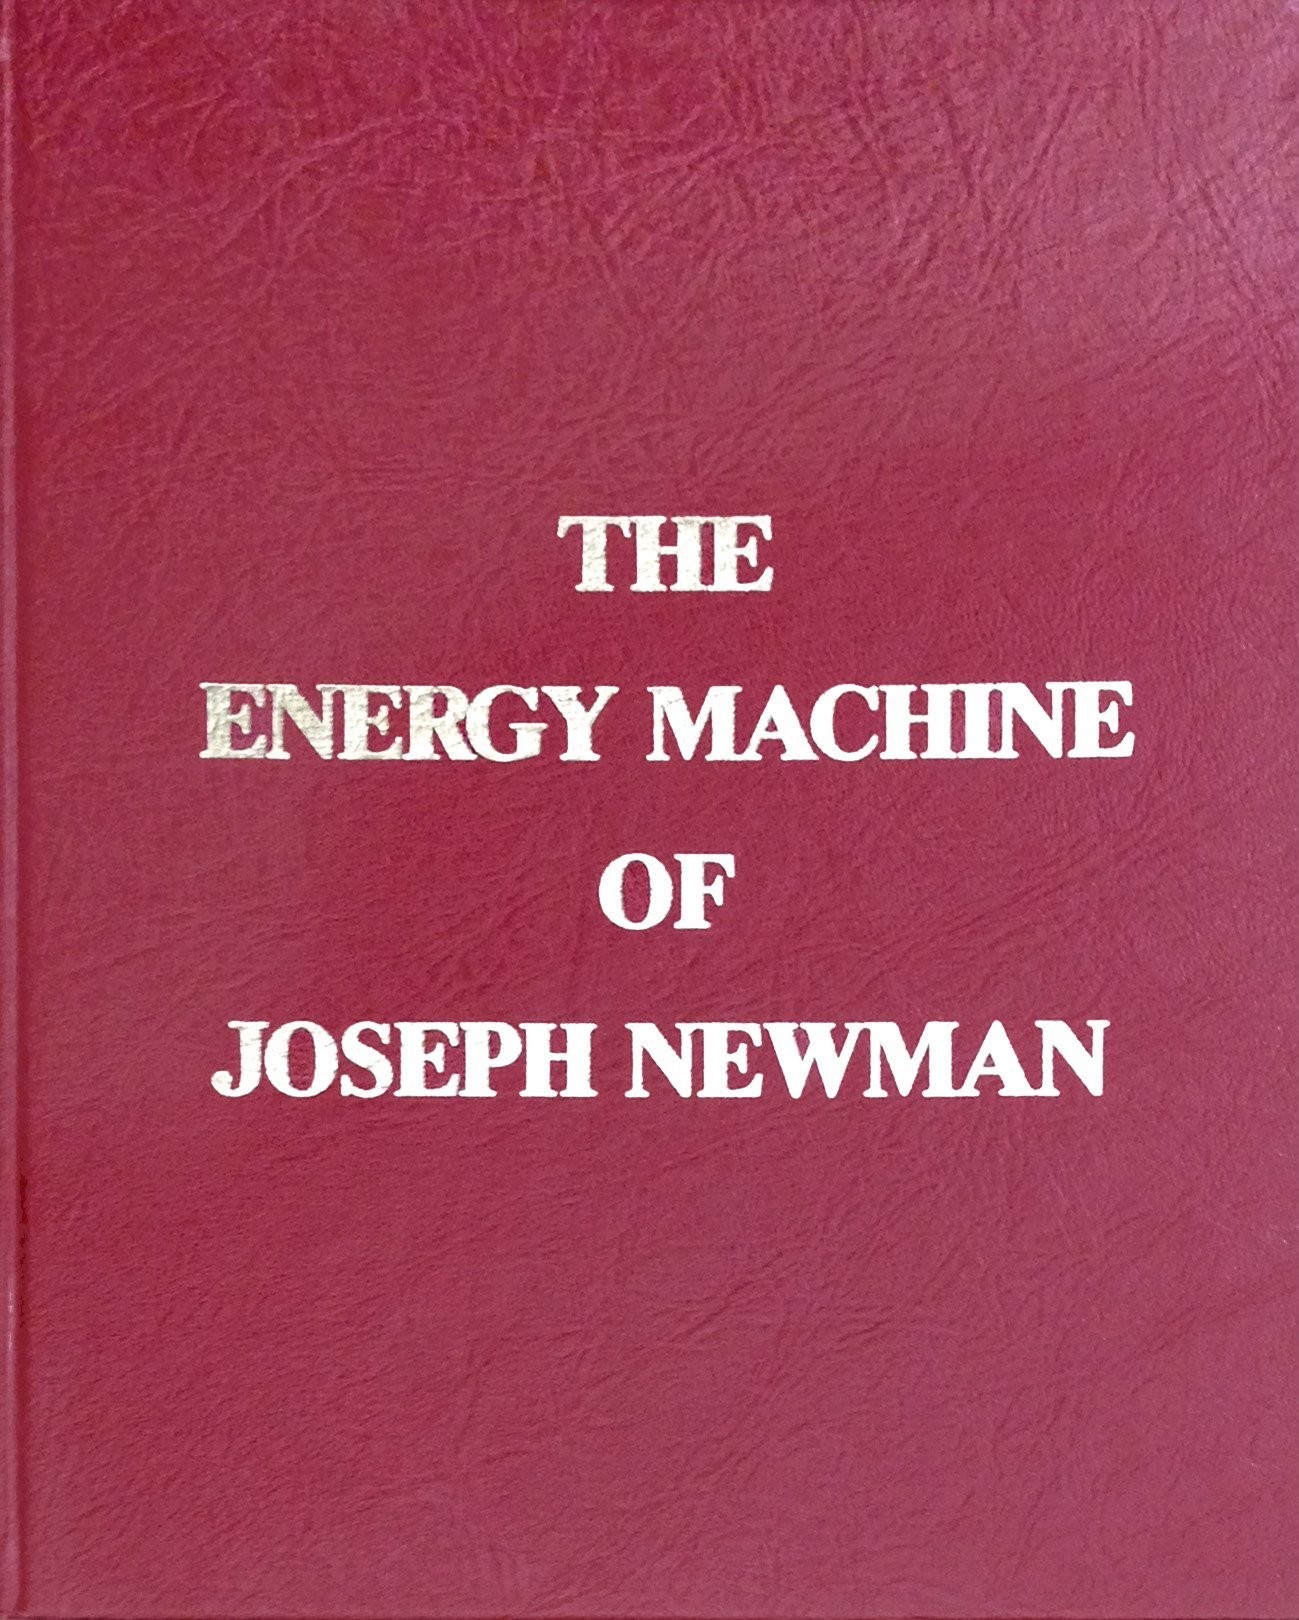 The Energy Machine of Joseph Newman: An Invention Whose Time Has Come